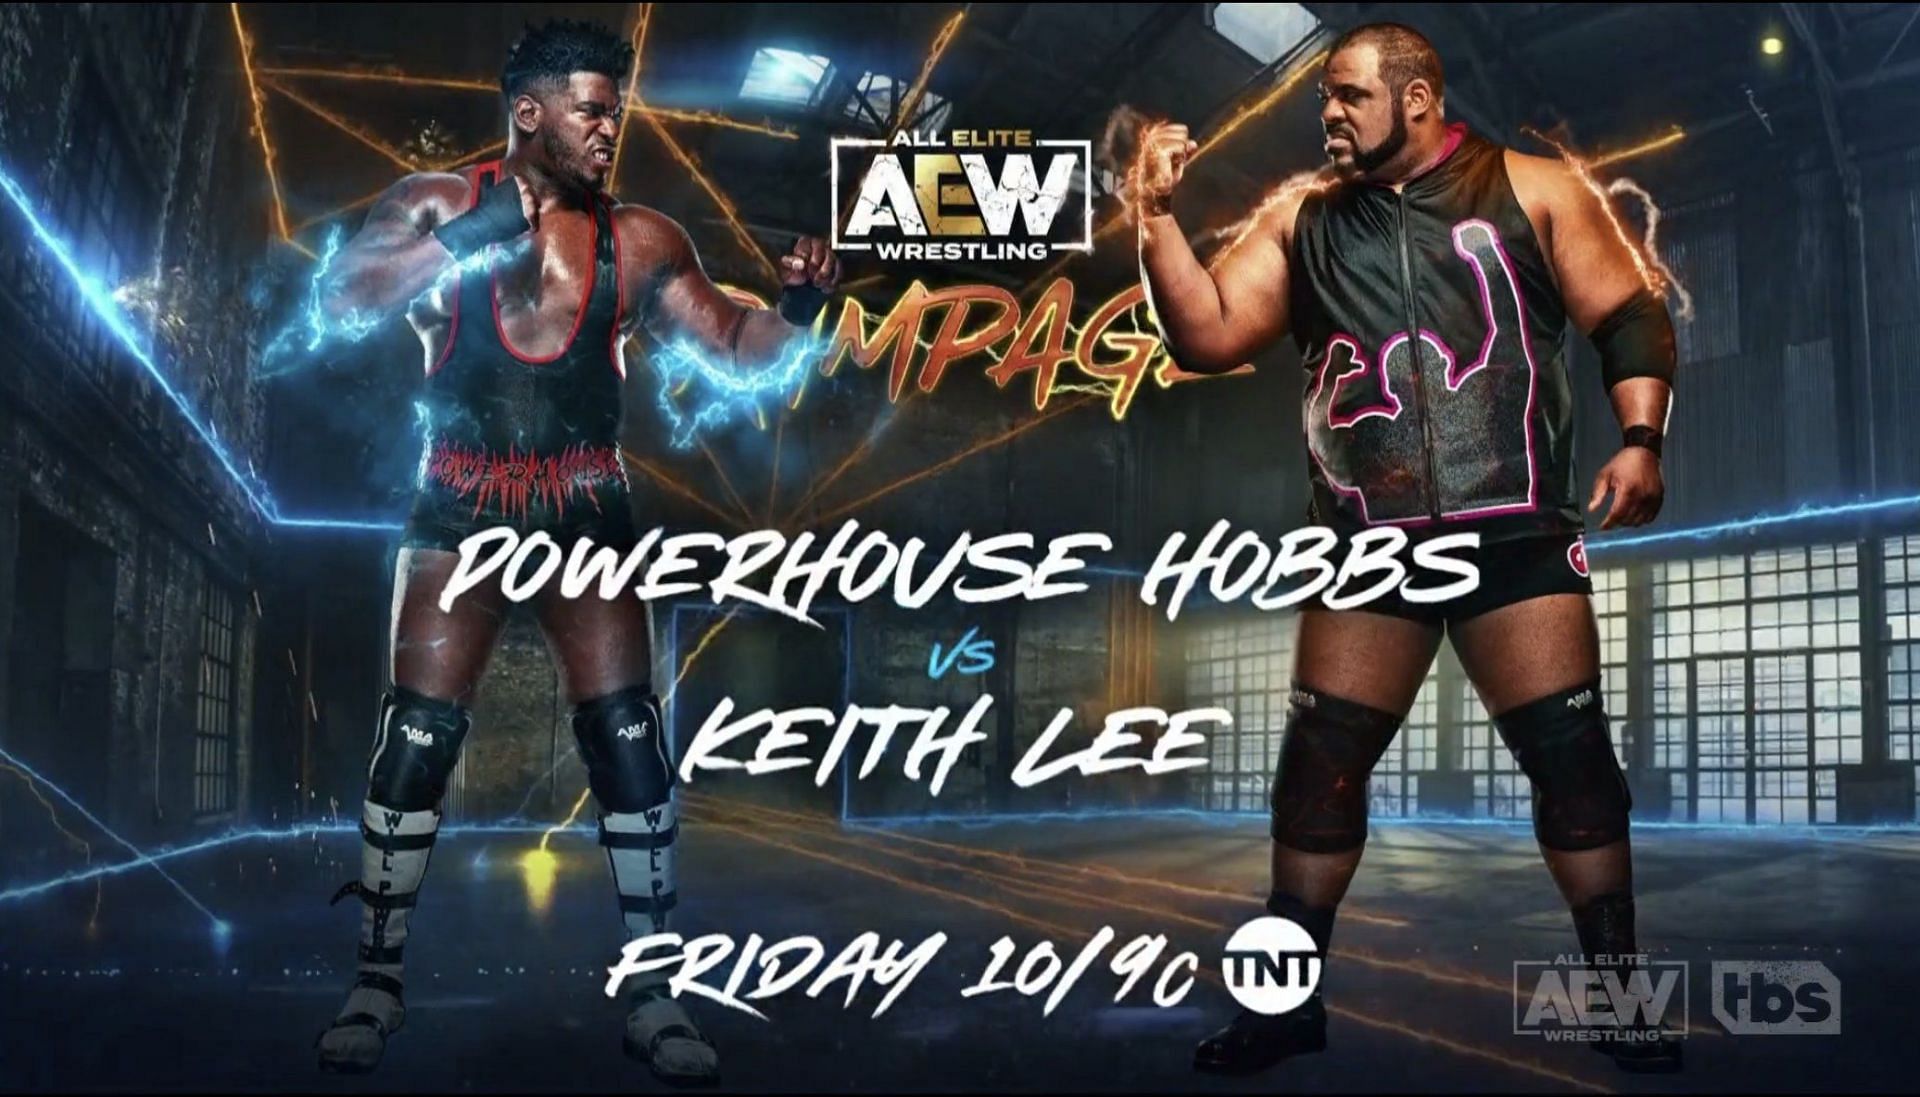 Hobbs and Lee bring down the house in the main event of AEW Rampage.